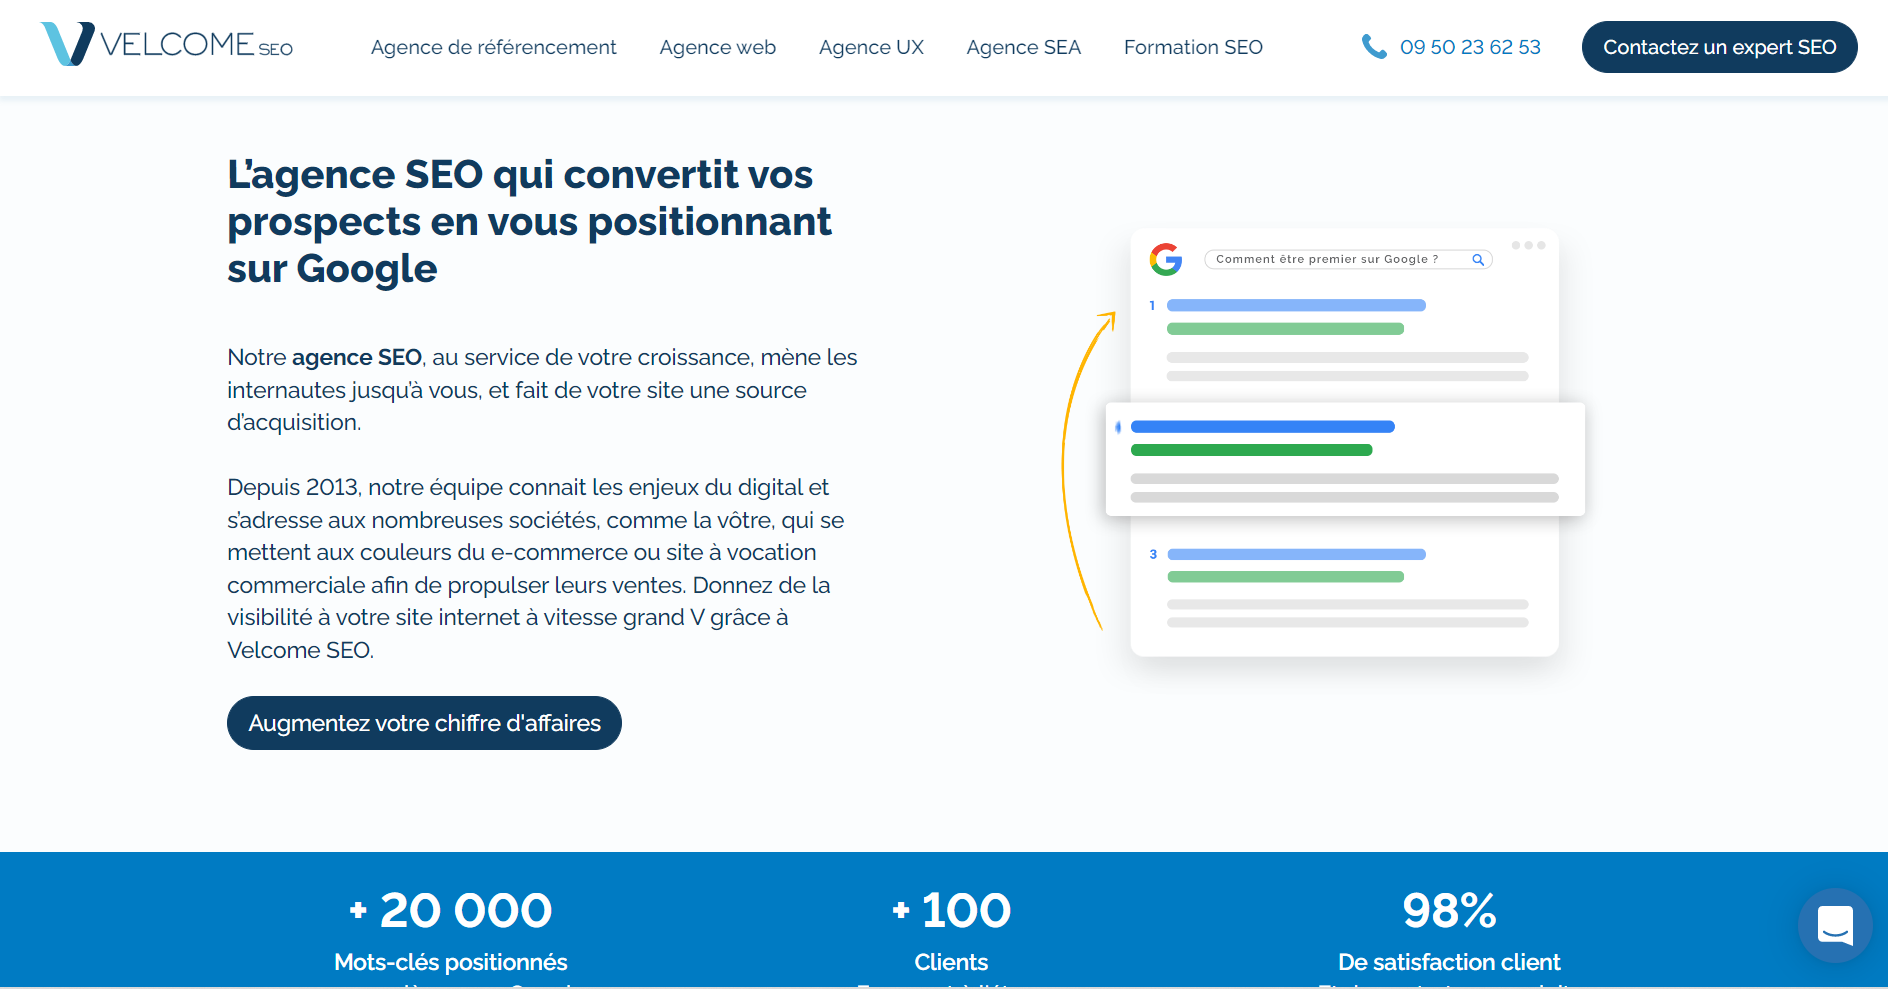  Velcomeseo - Agence Web à Toulouse